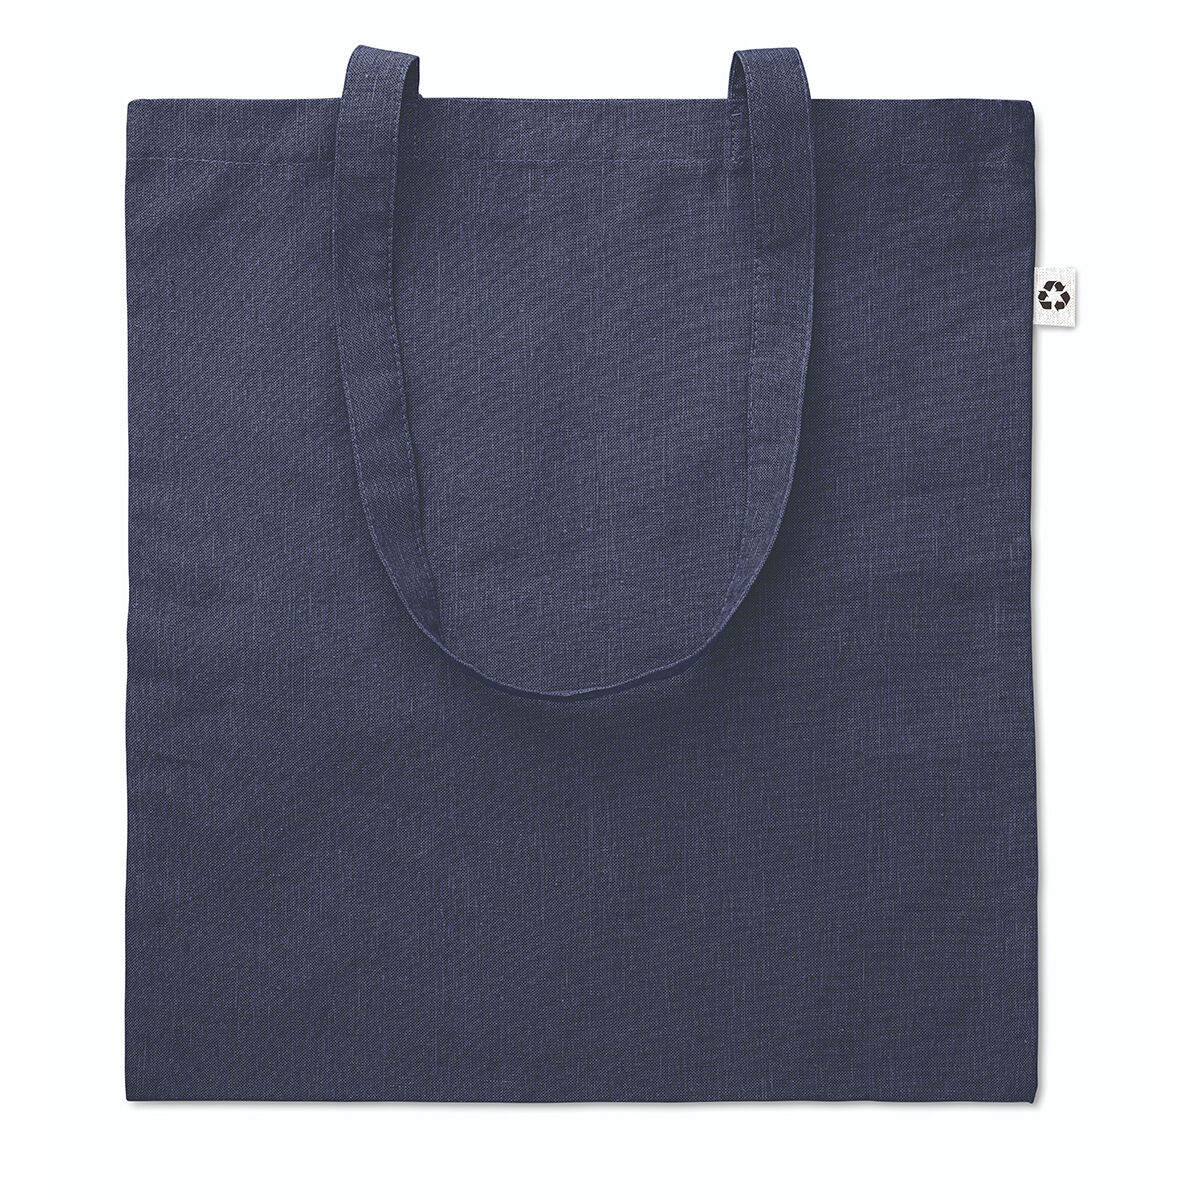 Recycled Cotton Tote Bag Navy Blue